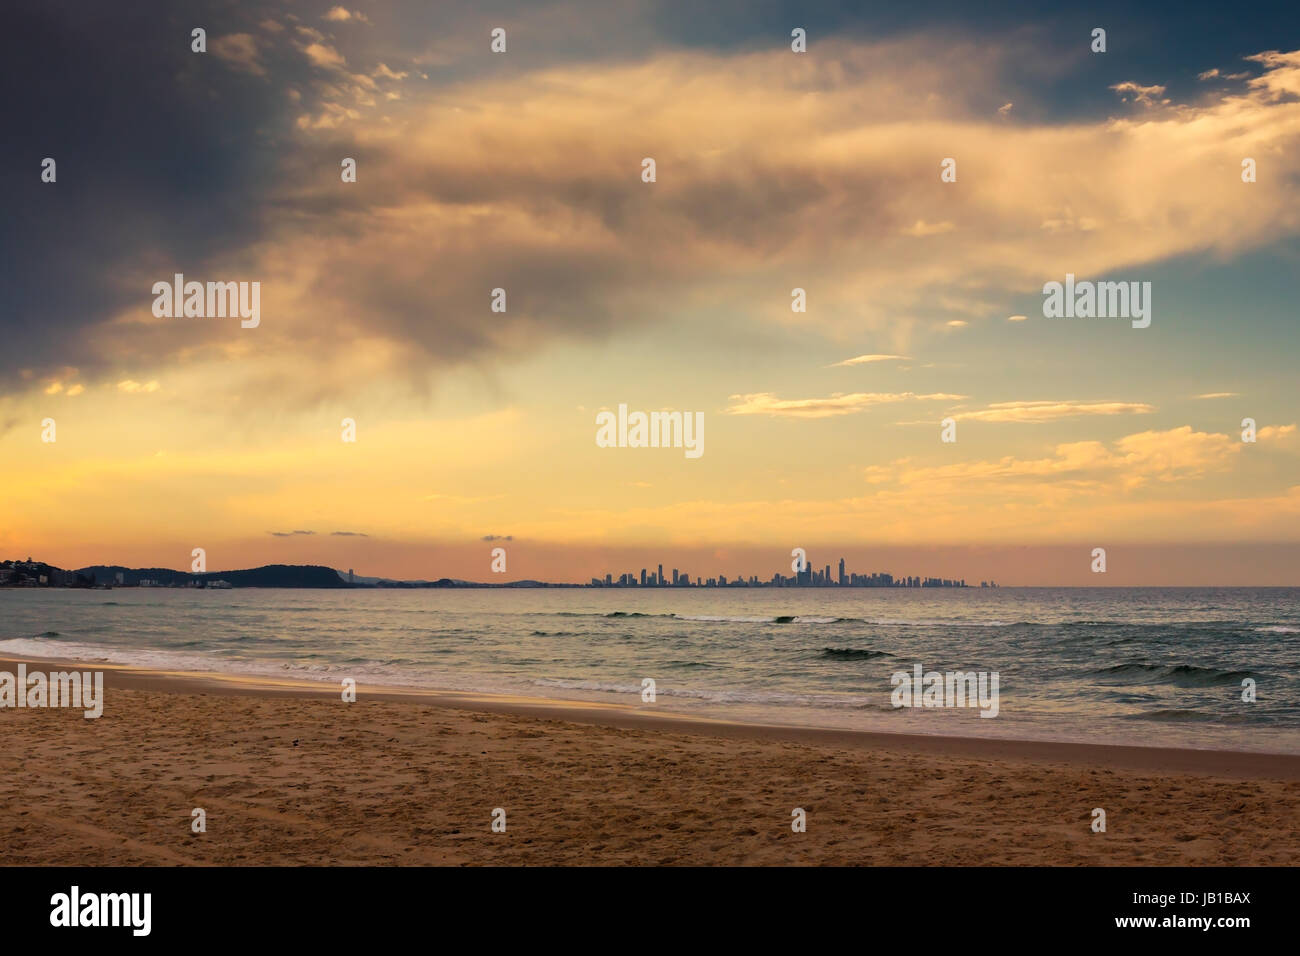 The skyline of the city of Gold Coast can be seen in the horizon from a beach in Coolangatta, QLD, Australia. A place well worth visiting. Stock Photo